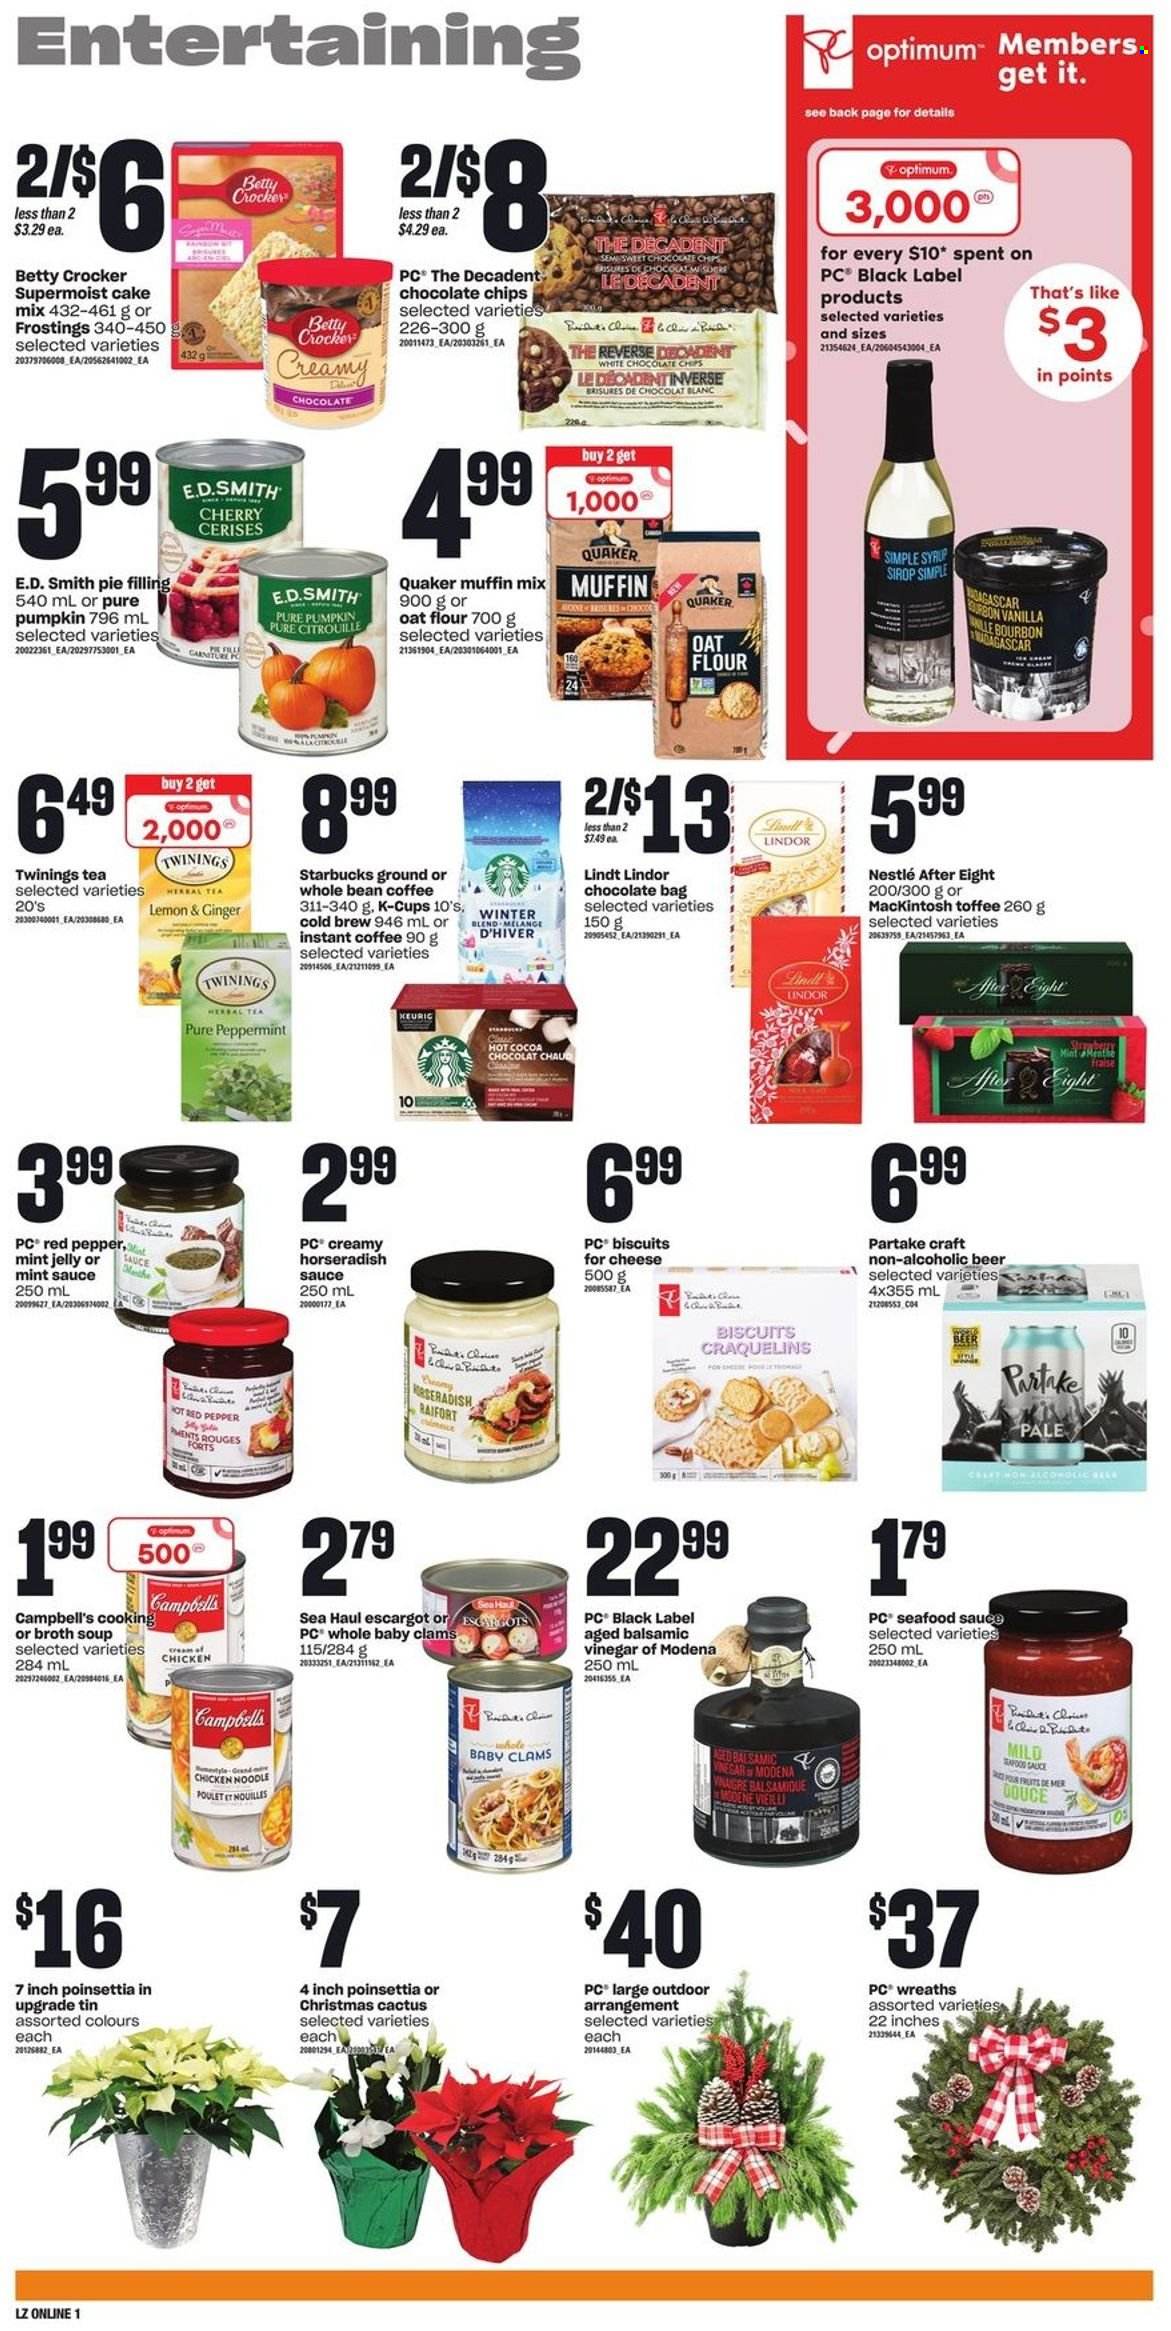 thumbnail - Loblaws Flyer - December 01, 2022 - December 07, 2022 - Sales products - cake mix, muffin mix, horseradish, pumpkin, cherries, clams, seafood, Campbell's, soup, sauce, Quaker, noodles, cheese, toffee, jelly, biscuit, After Eight, flour, pie filling, oats, broth, mint jelly, balsamic vinegar, syrup, hot cocoa, tea, herbal tea, Twinings, coffee, instant coffee, coffee capsules, K-Cups, bourbon, beer, Optimum, chair, poinsettia, cactus, Nestlé, Lindt, Lindor. Page 5.